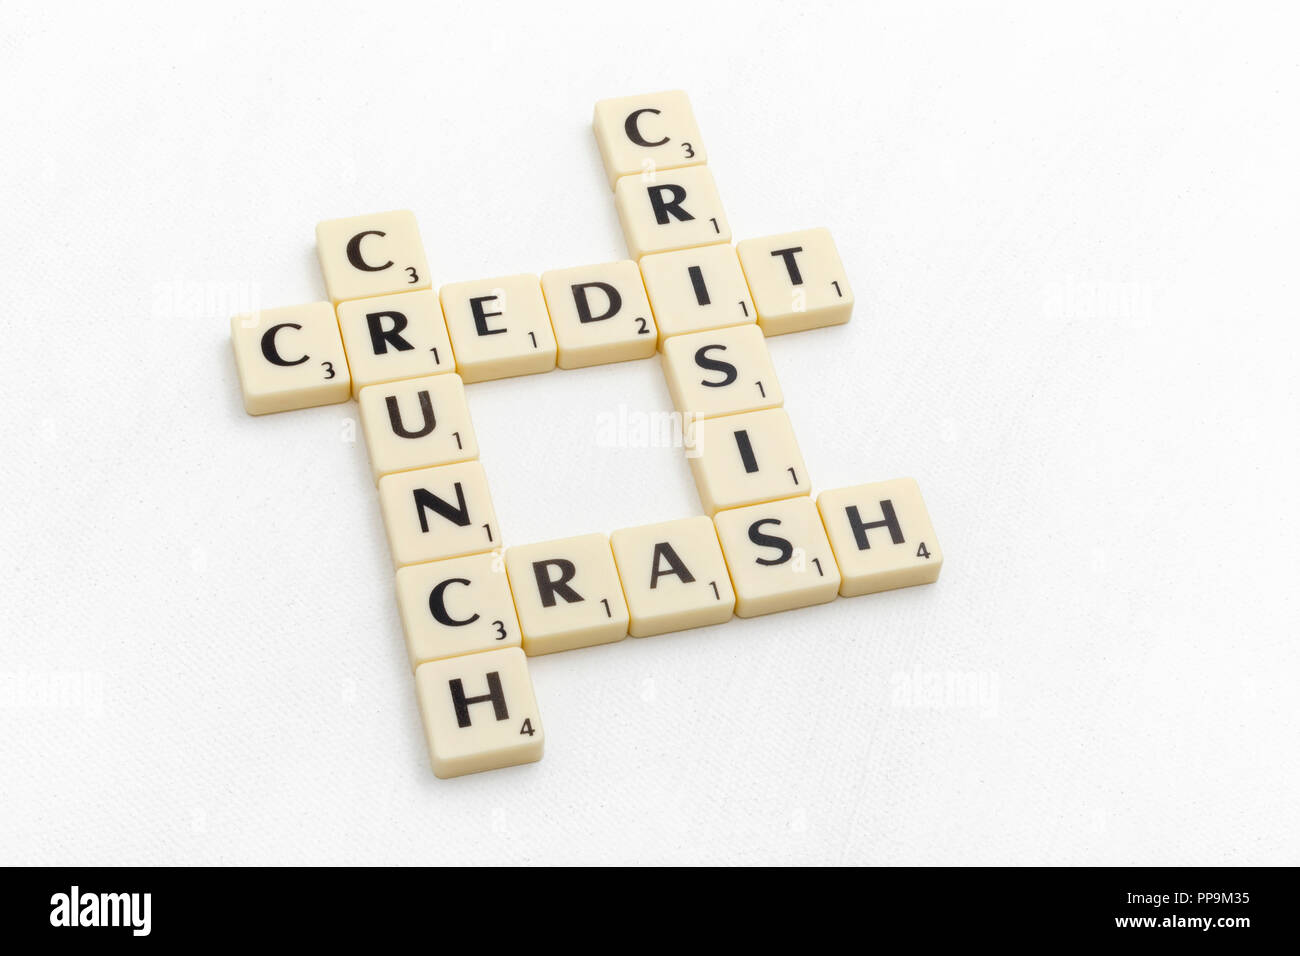 Letter tiles spelling out aspects of personal finances / financial management, financial crisis, running up bills, loan debts, SVB bank collapse. Stock Photo